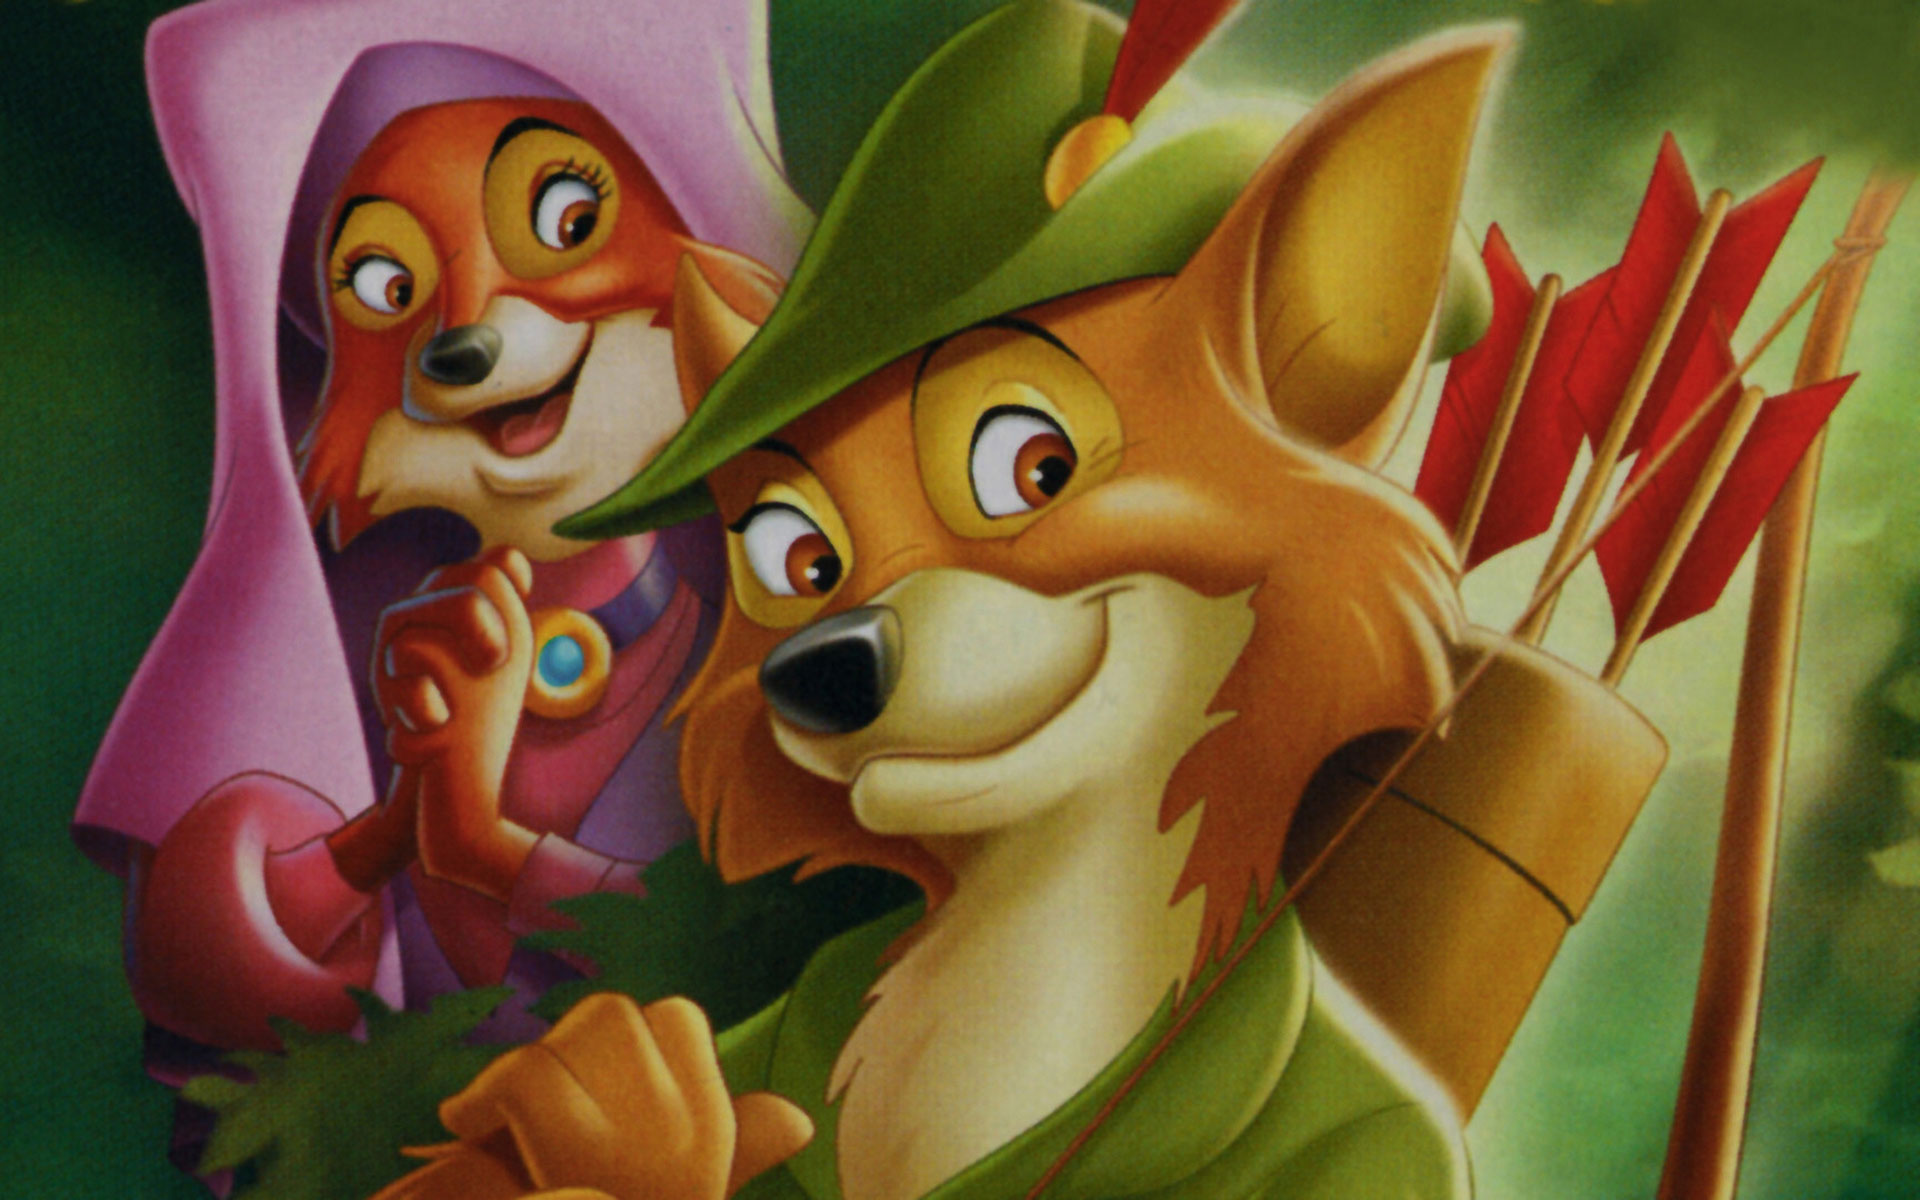 Robin Hood (1973) HD Wallpaper and Background